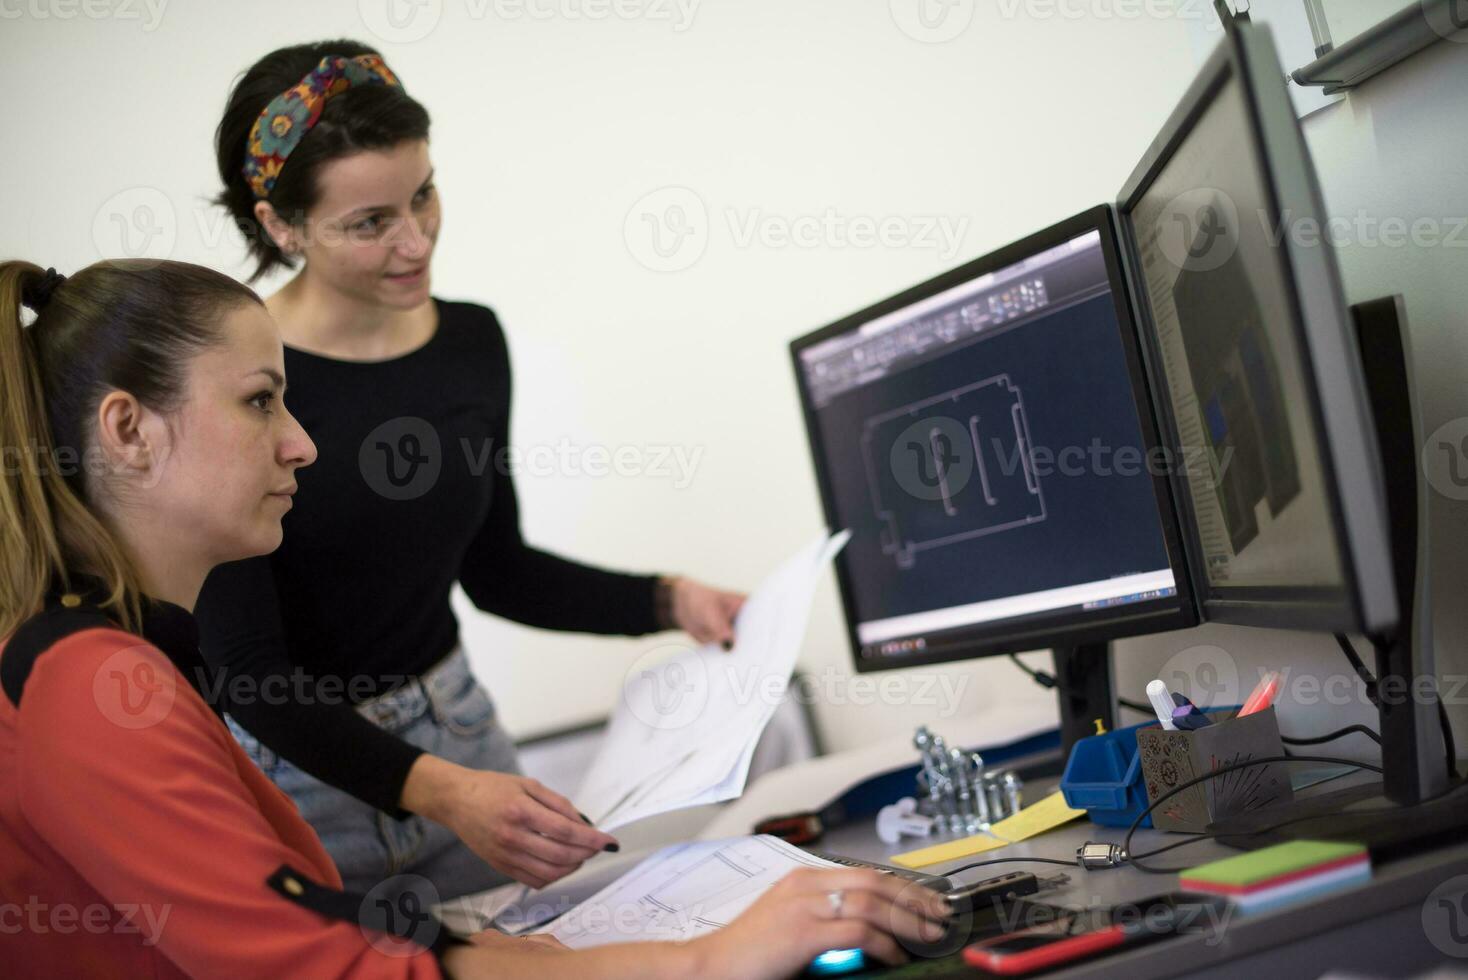 Within the heavy industry, a factory industrial engineer measures with a caliper and on a personal computer Designs a 3D model photo